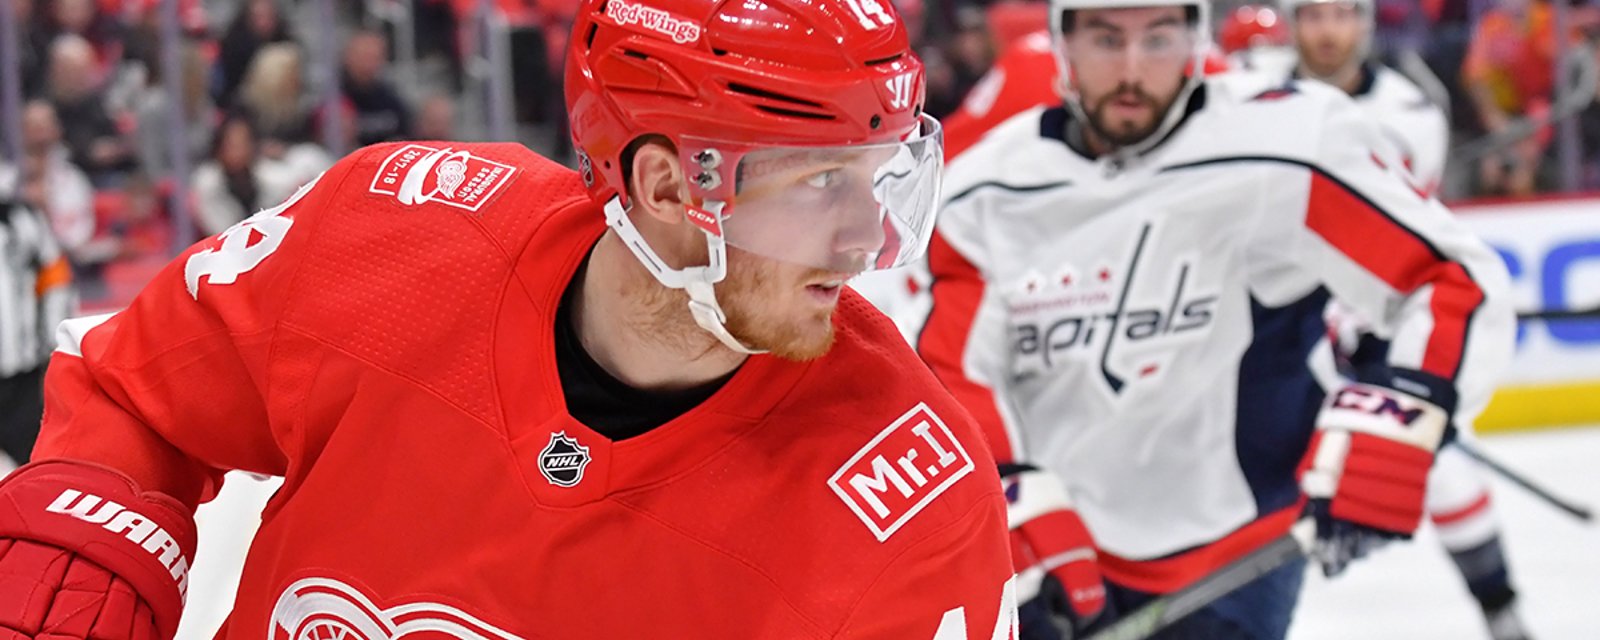 Report: Red Wings have asked Nyquist to waive his no trade clause